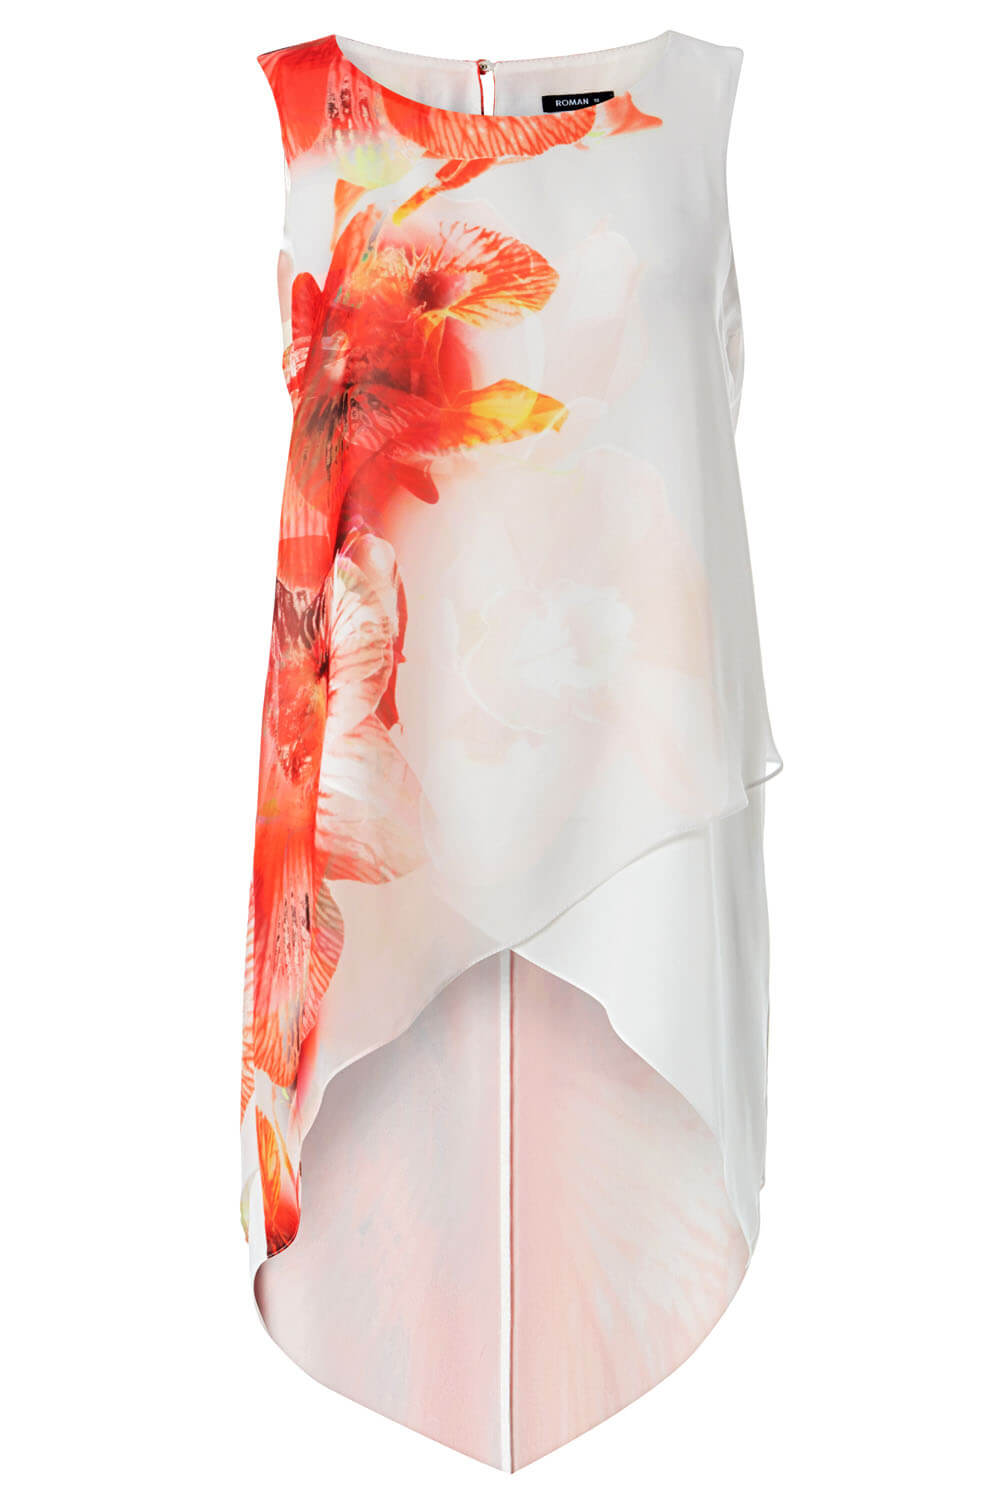 Red Floral Print Asymmetric Chiffon Top , Image 5 of 5